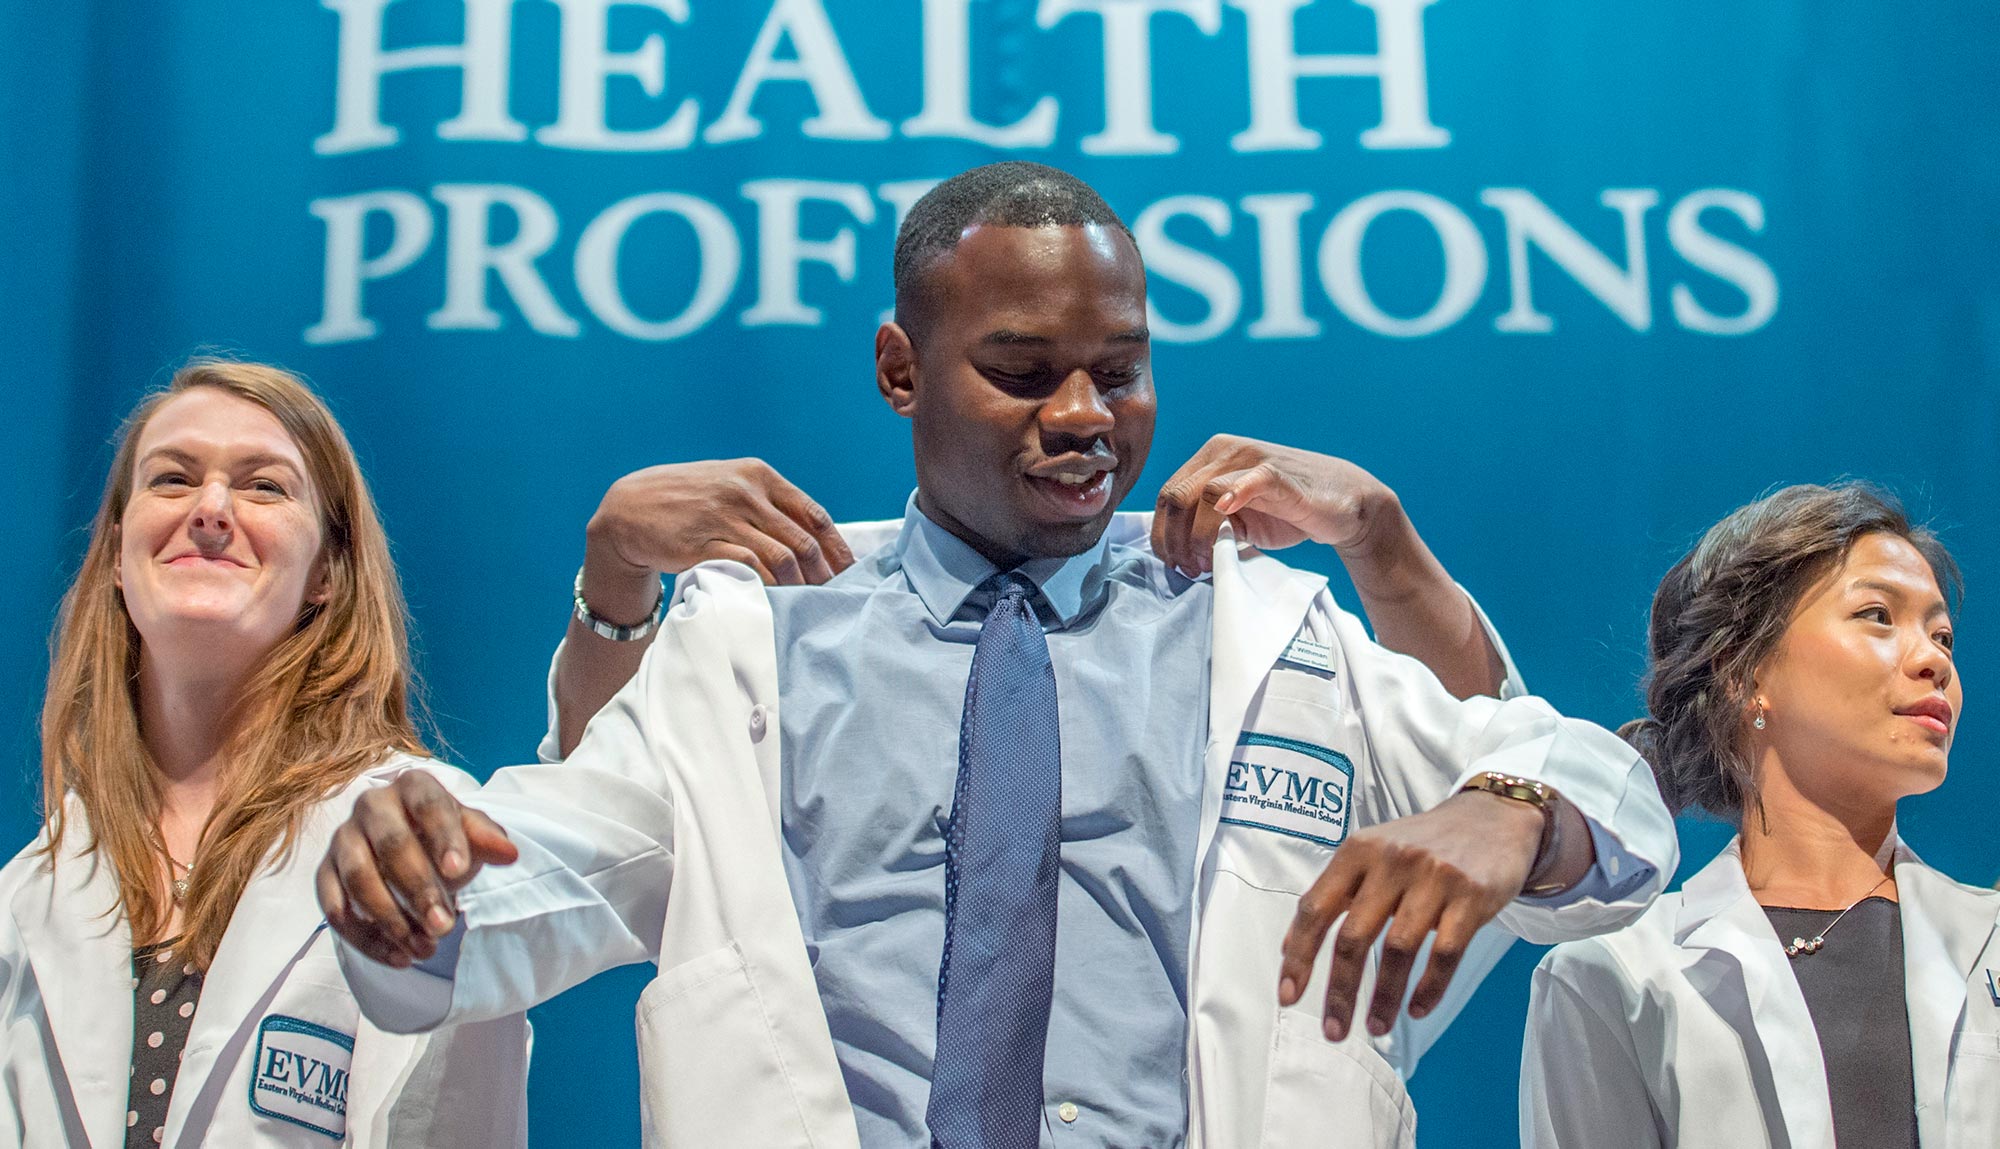 A PA student puts on his white coat during the PA White Coat Ceremony, signifying his transition from student to practitioner.